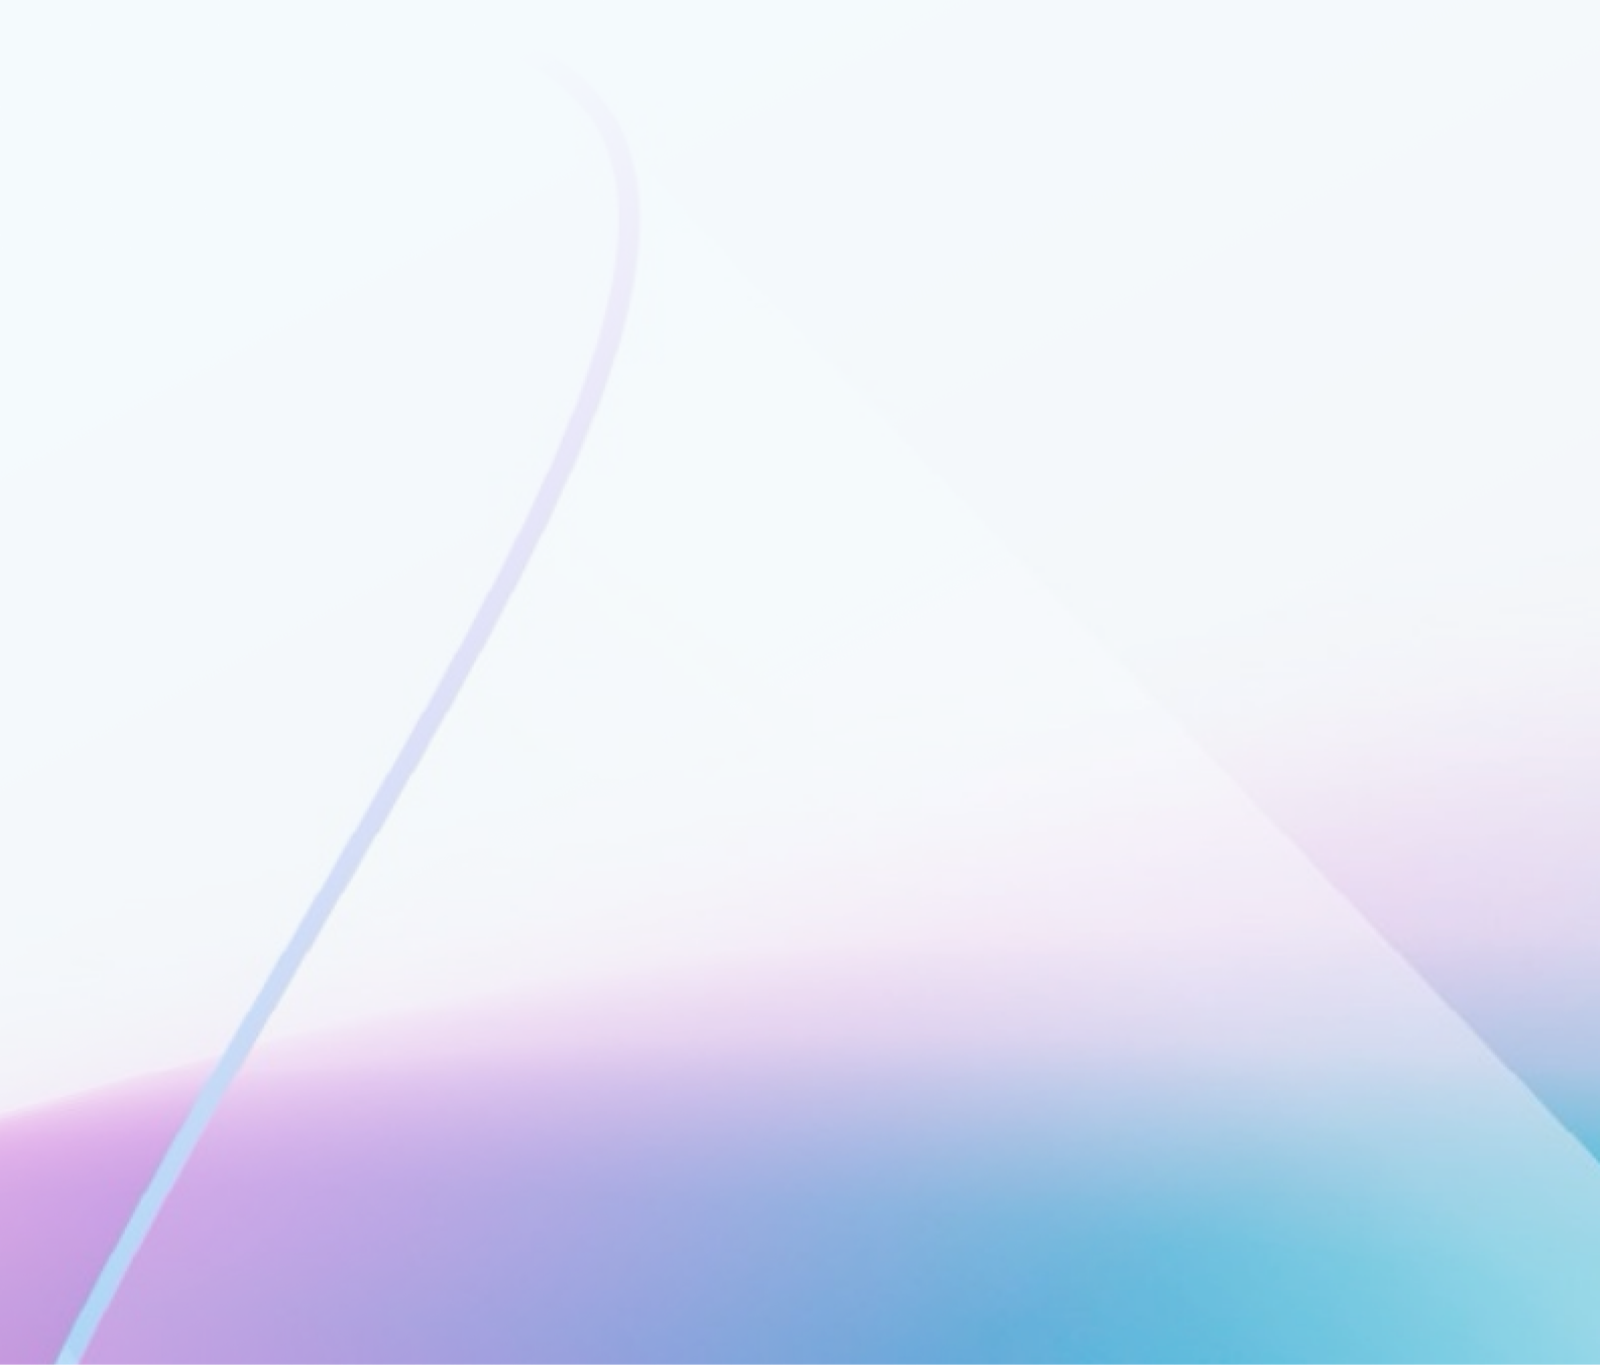 Gradient background with pastel blue, pink, and white colors intersected by a thin, curved white line.